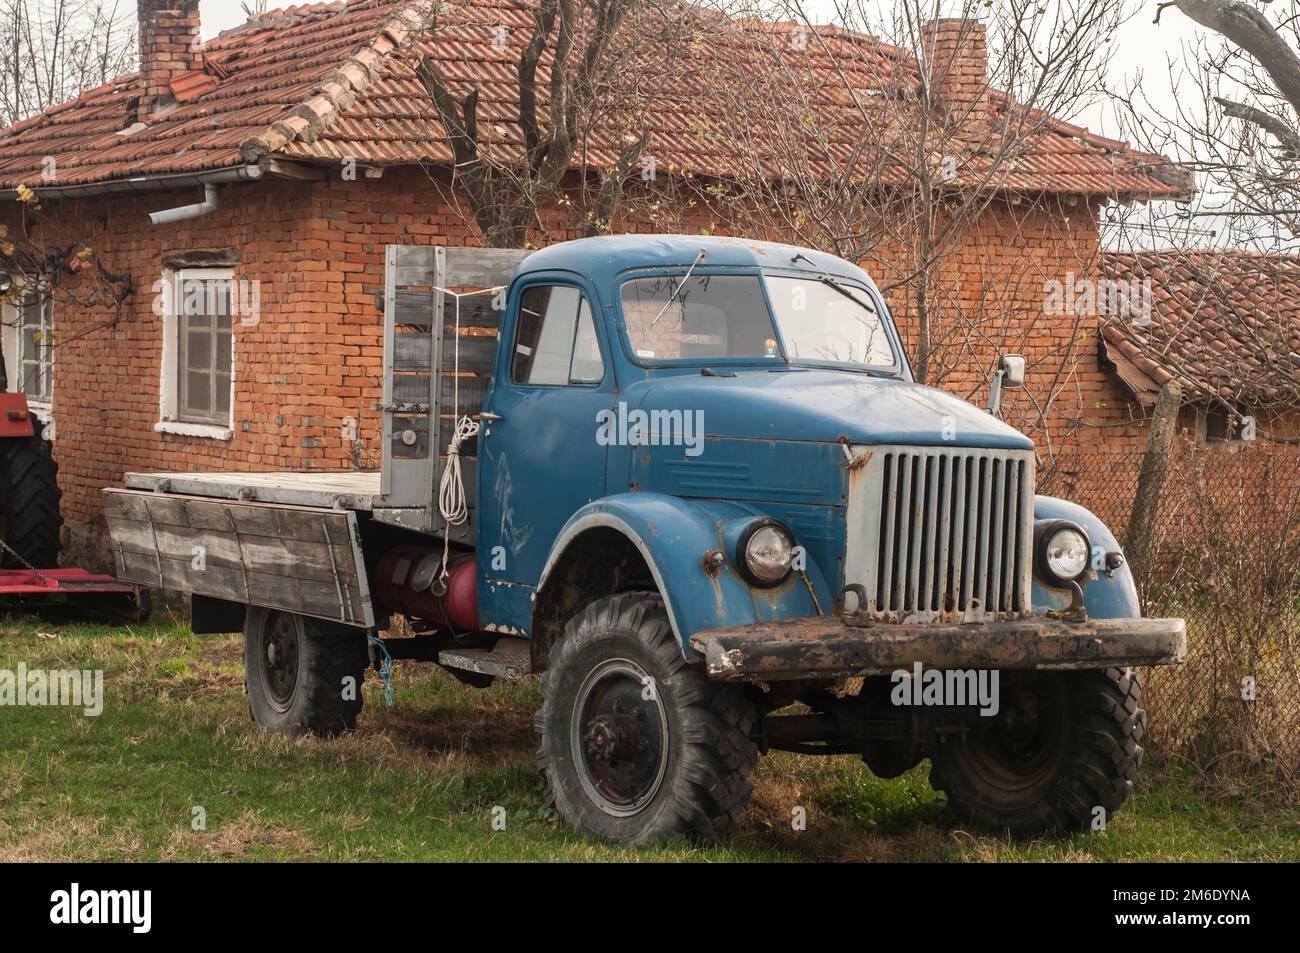 Vintage truck closeup to rural country house Stock Photo